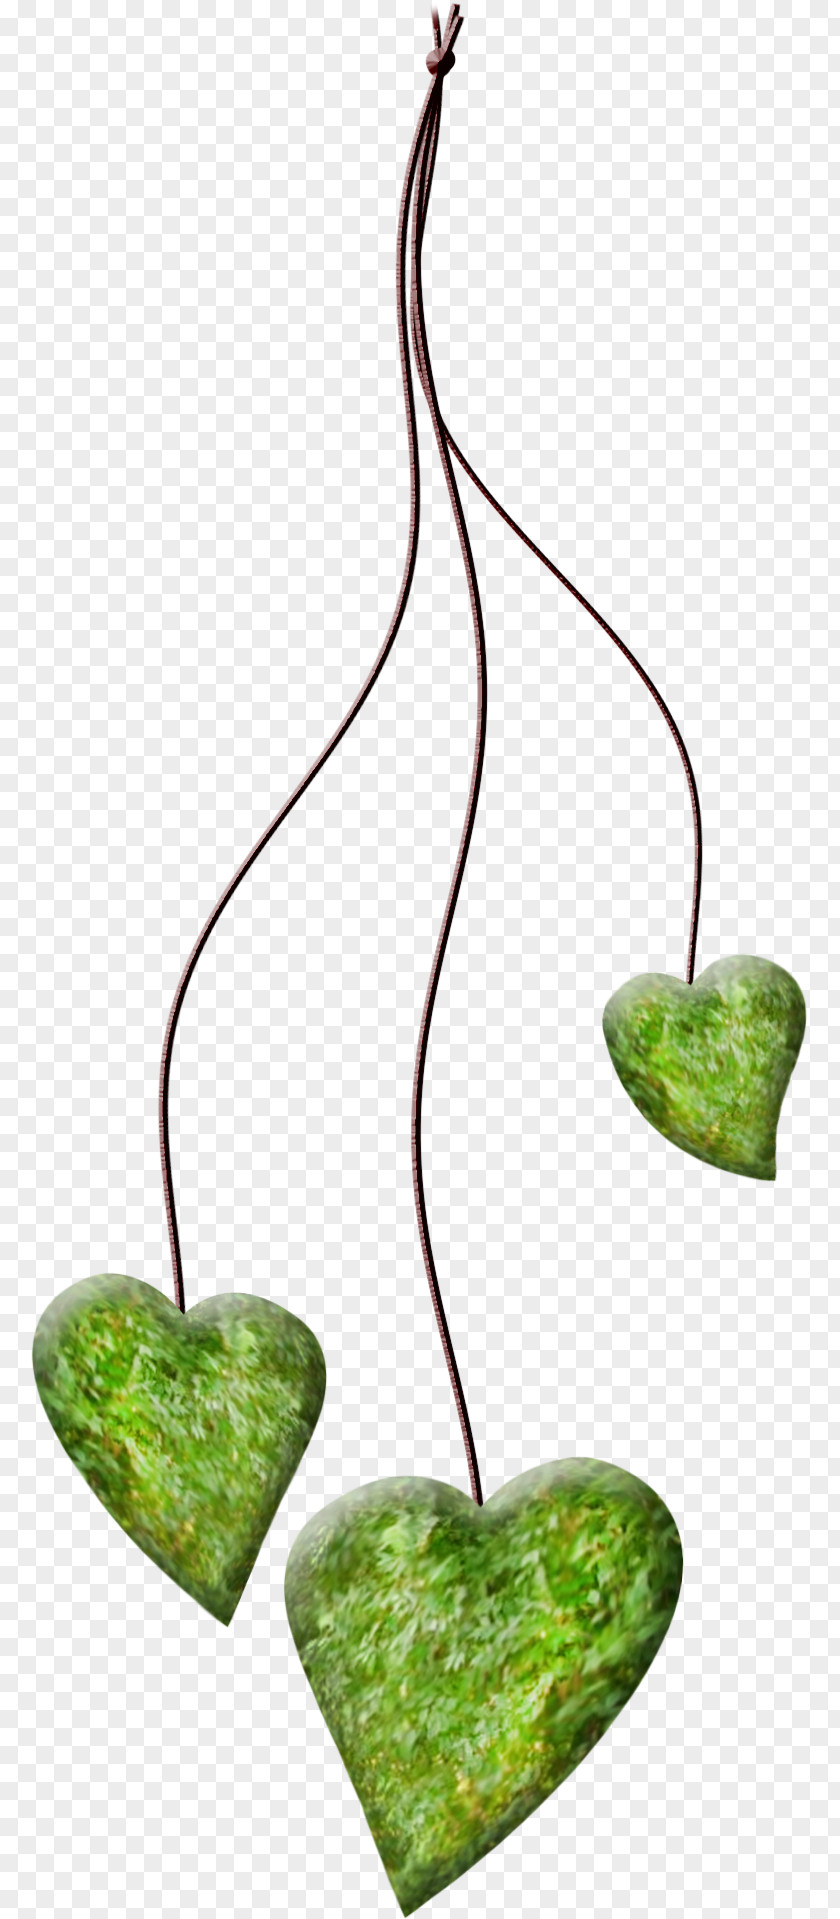 Free GreenRope Peach Heart Rope PNG